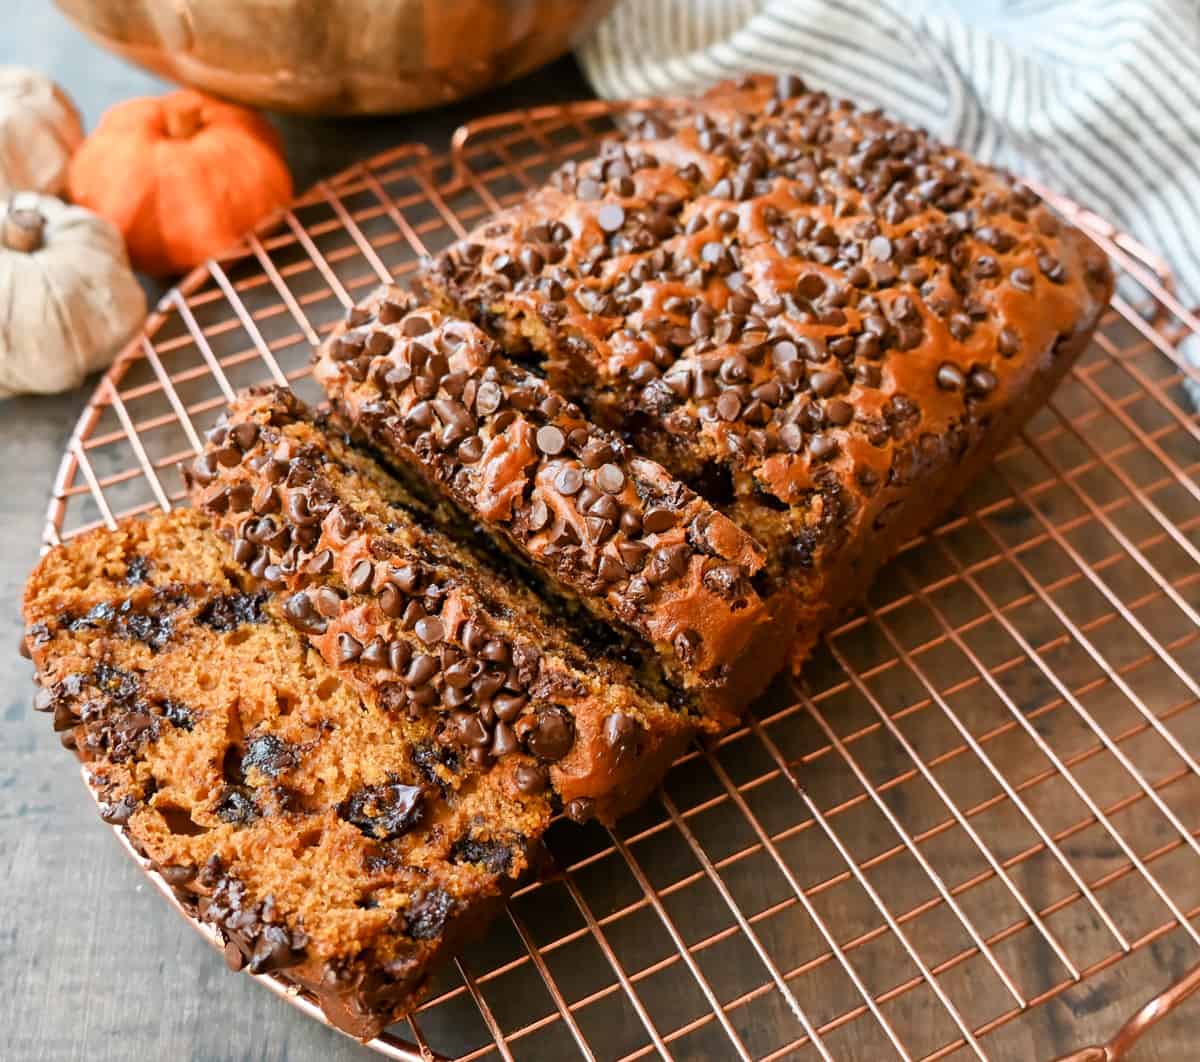 How to make the best pumpkin chocolate chip bread ever! This moist pumpkin spiced bread with chocolate chips will be a Fall favorite. It is the most perfect chocolate chip pumpkin bread.